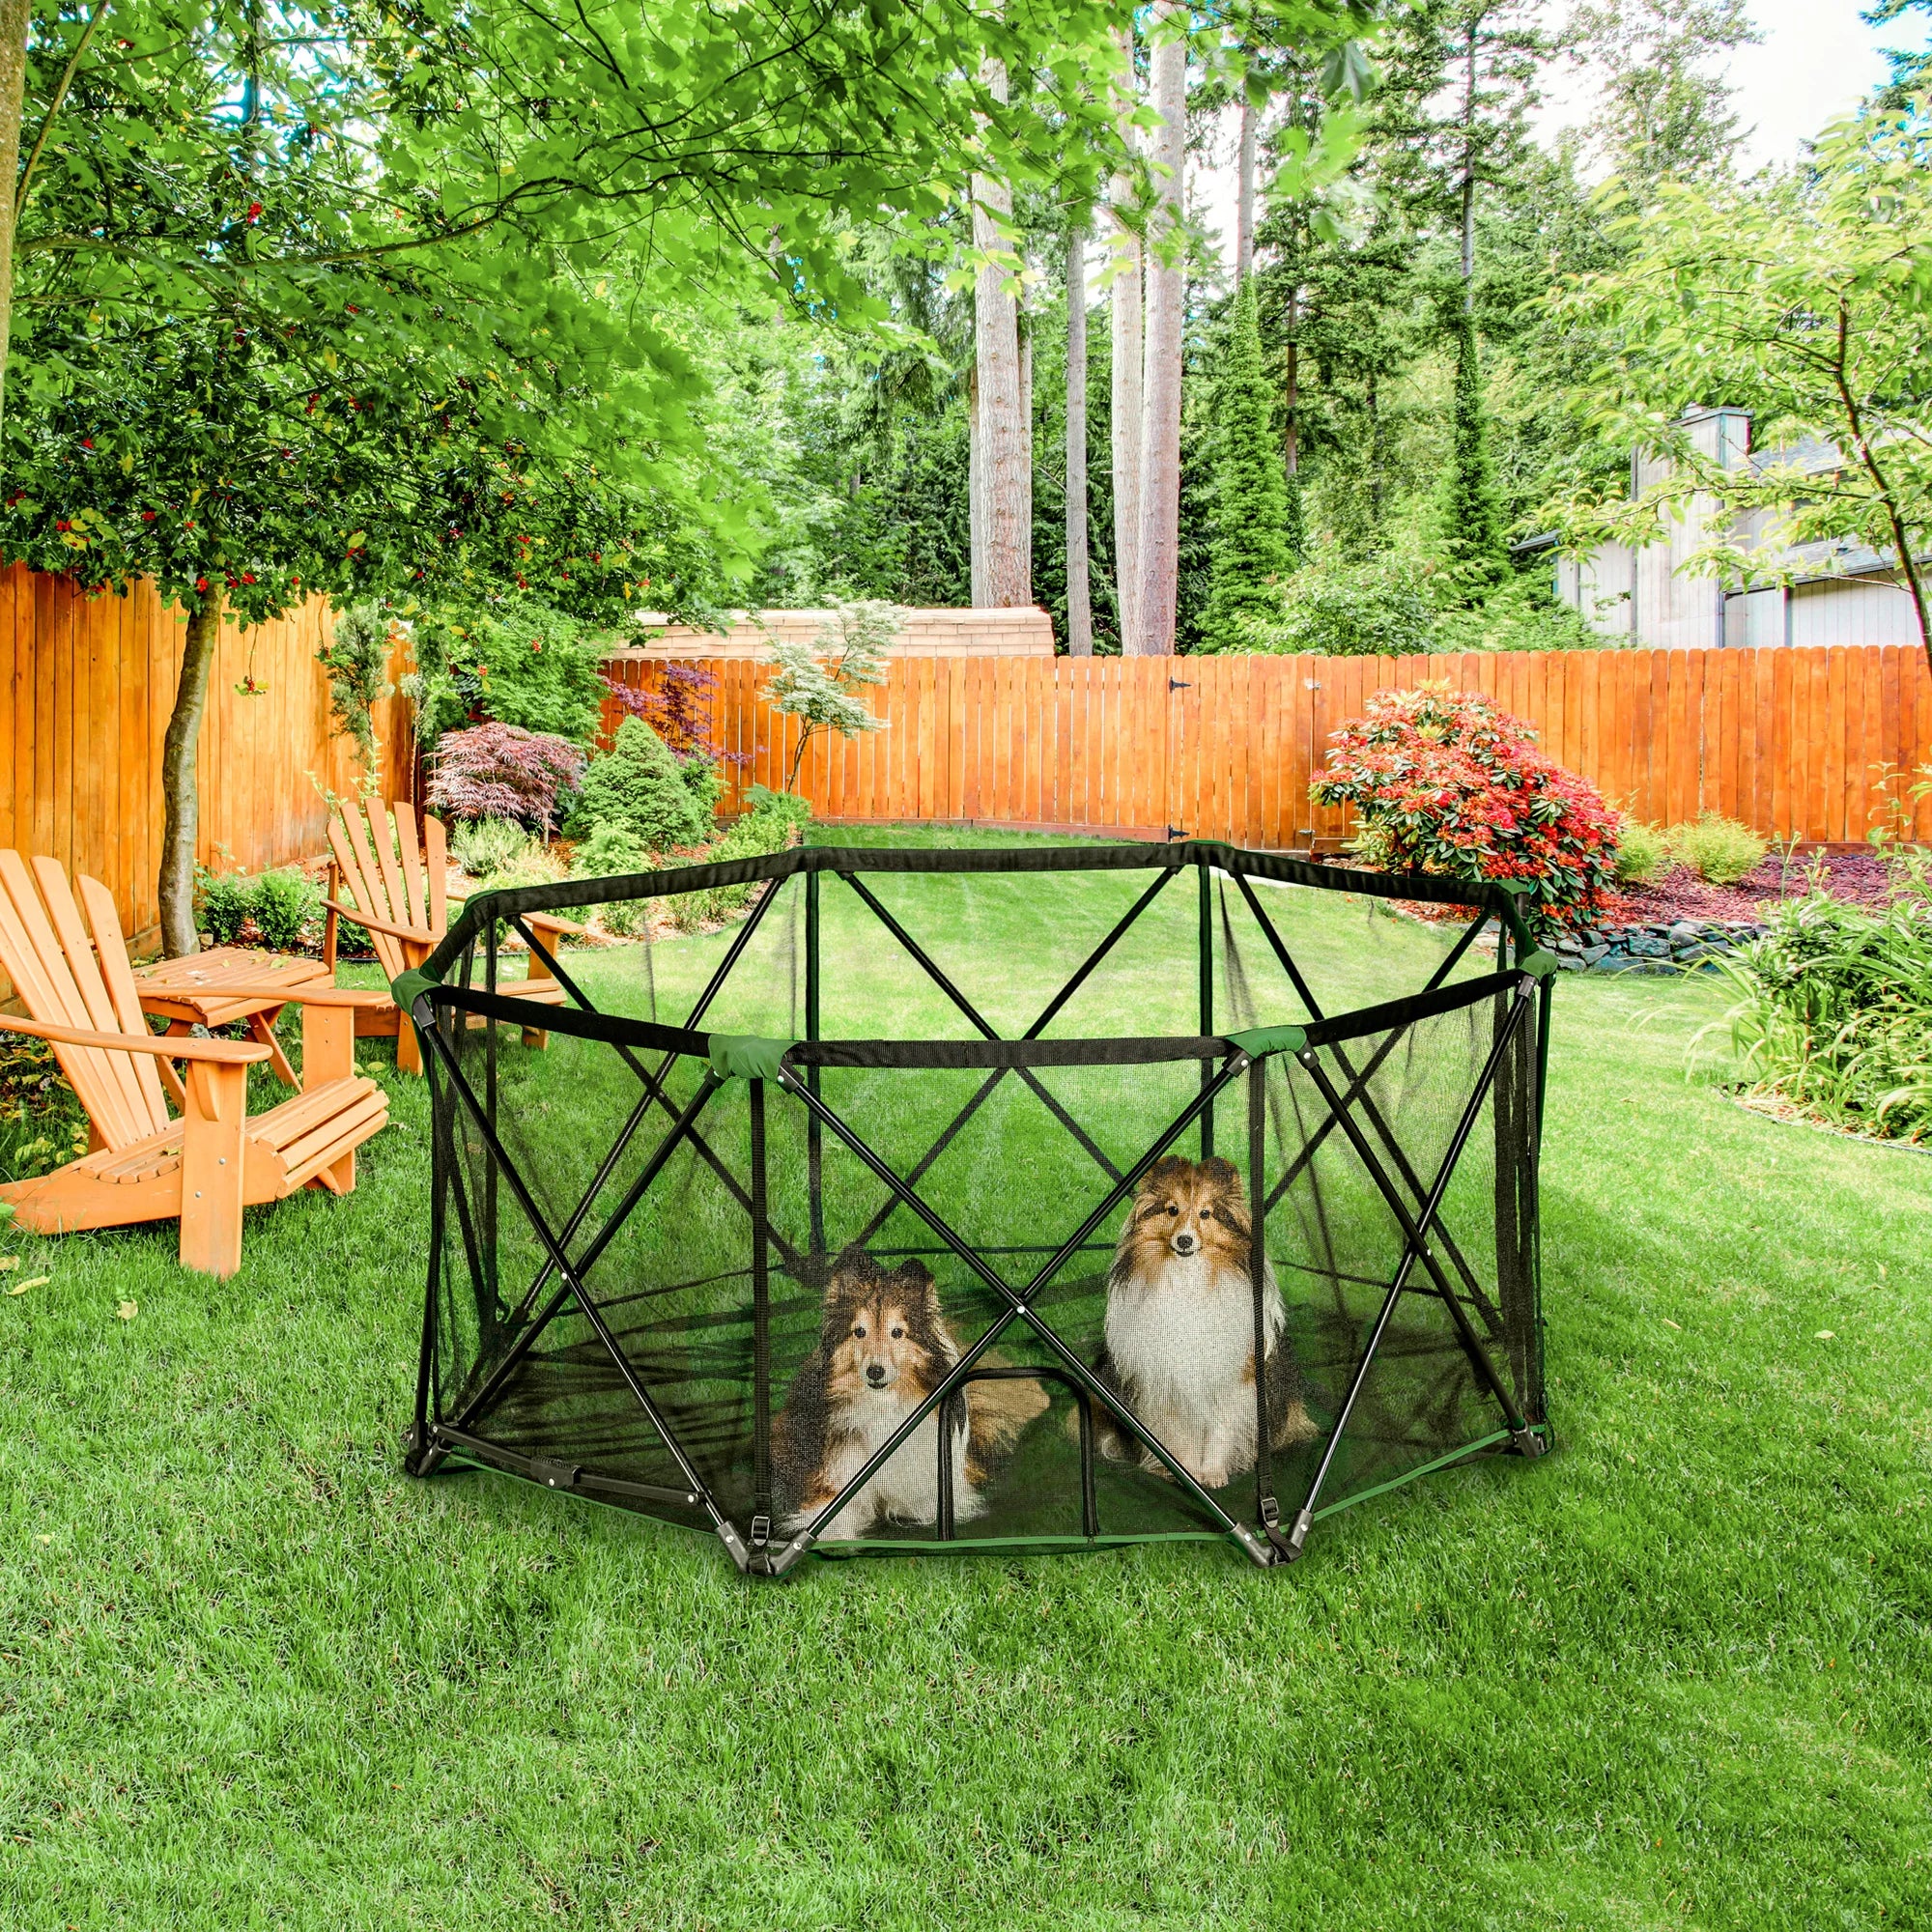 Two dogs in Portable Pet Pen while on green grass in a backyard.